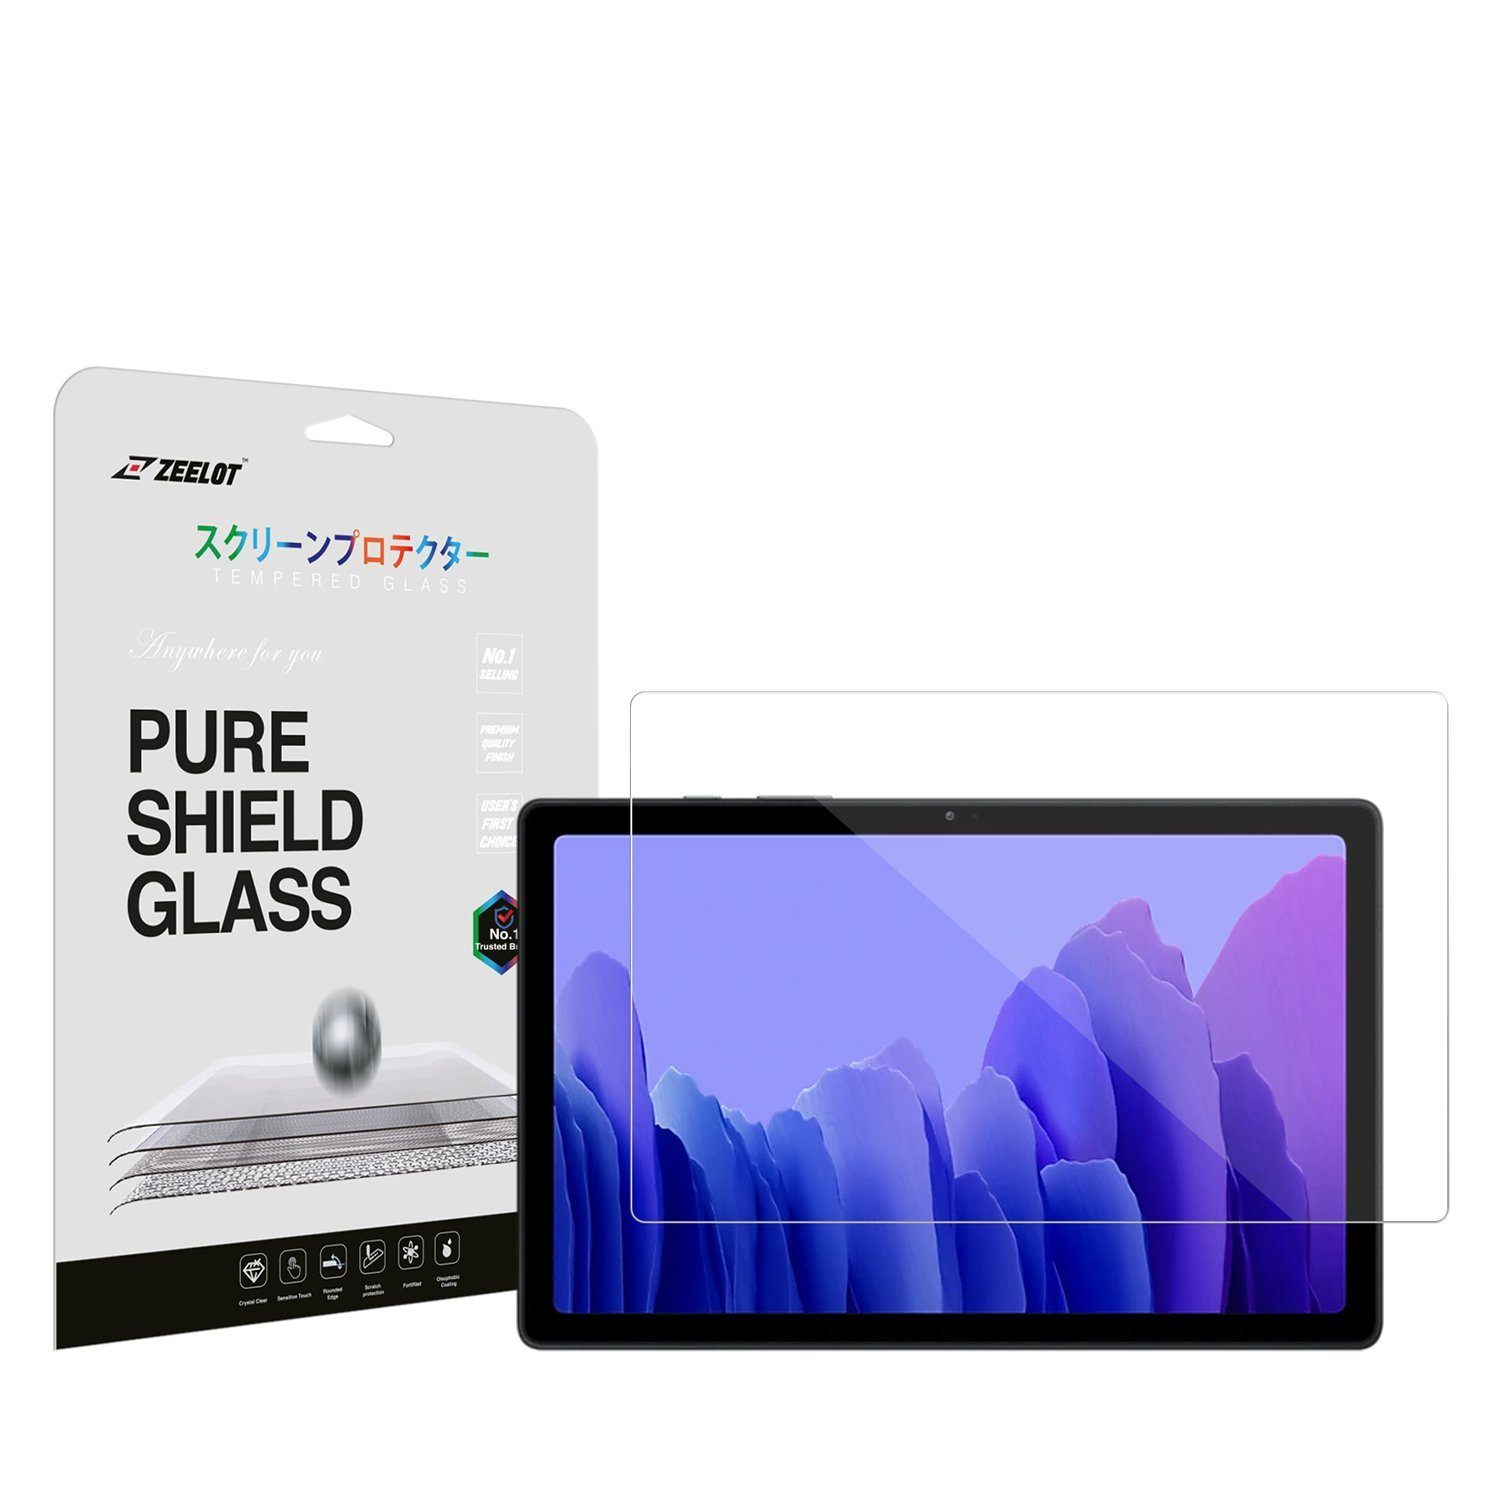 ZEELOT PureShield 2.5D Tempered Glass Screen Protector for Samsung Galaxy Tab A7 (2020), Clear Tab A7 ZEELOT 